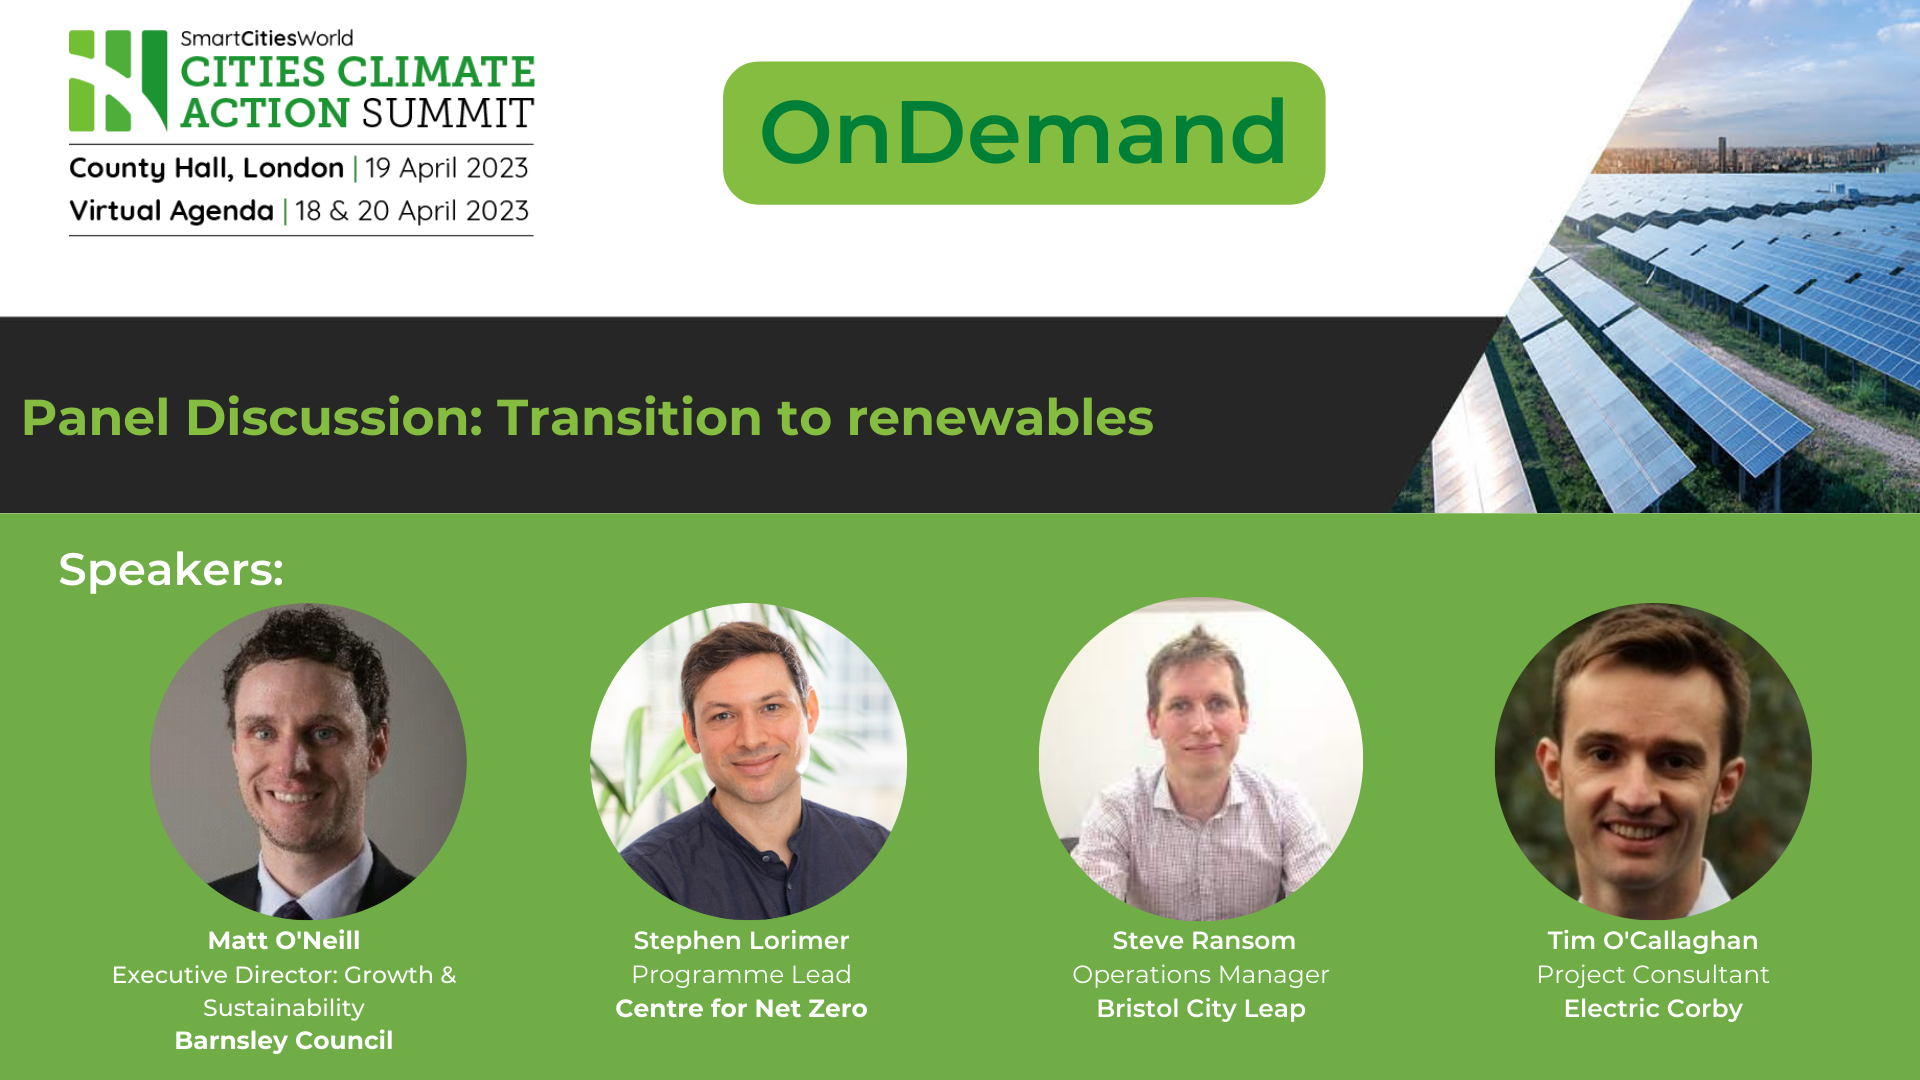 OnDemand Panel discussion: Transition to renewables